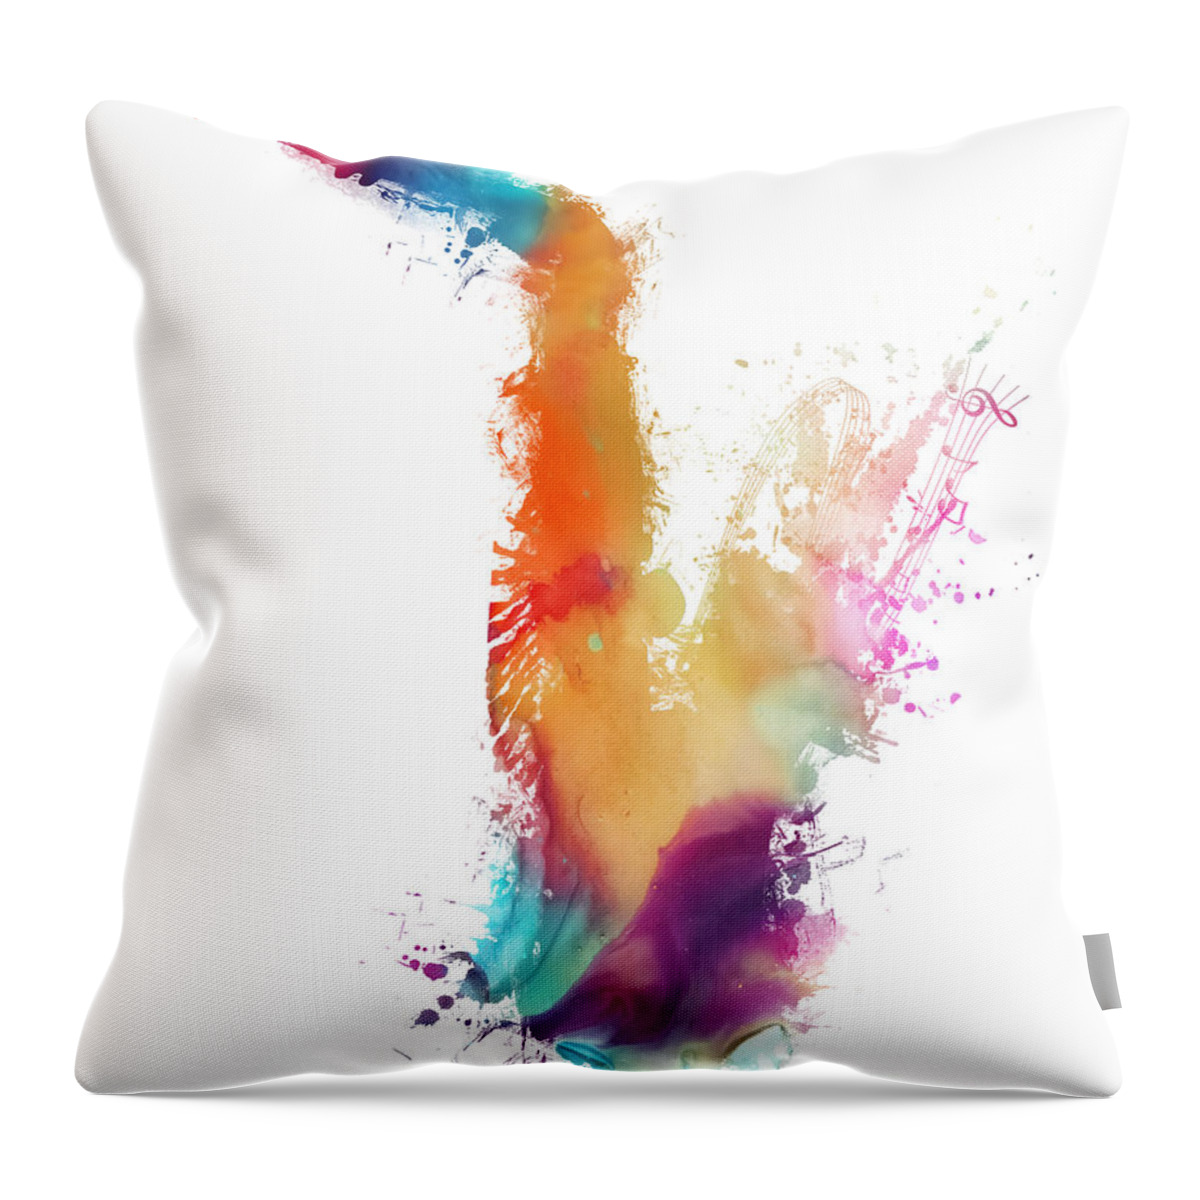 Saxophone Throw Pillow featuring the digital art Saxophone colored musical instrument by Justyna Jaszke JBJart